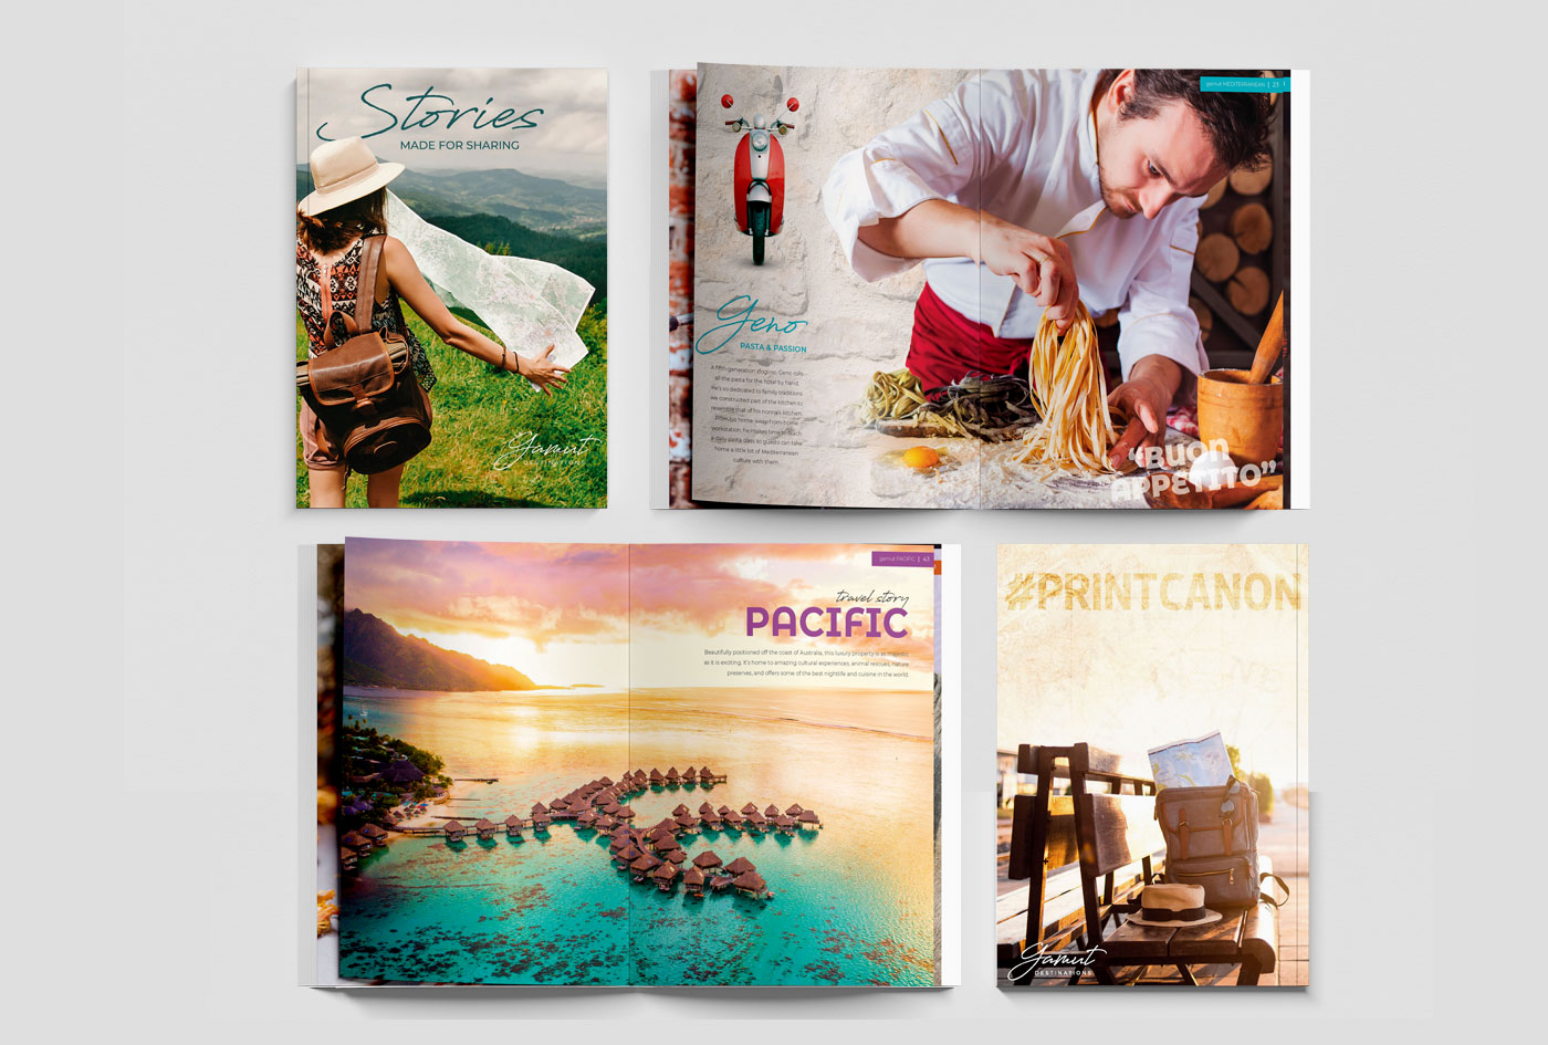 four different magazine spreads show lovely vacation imagery